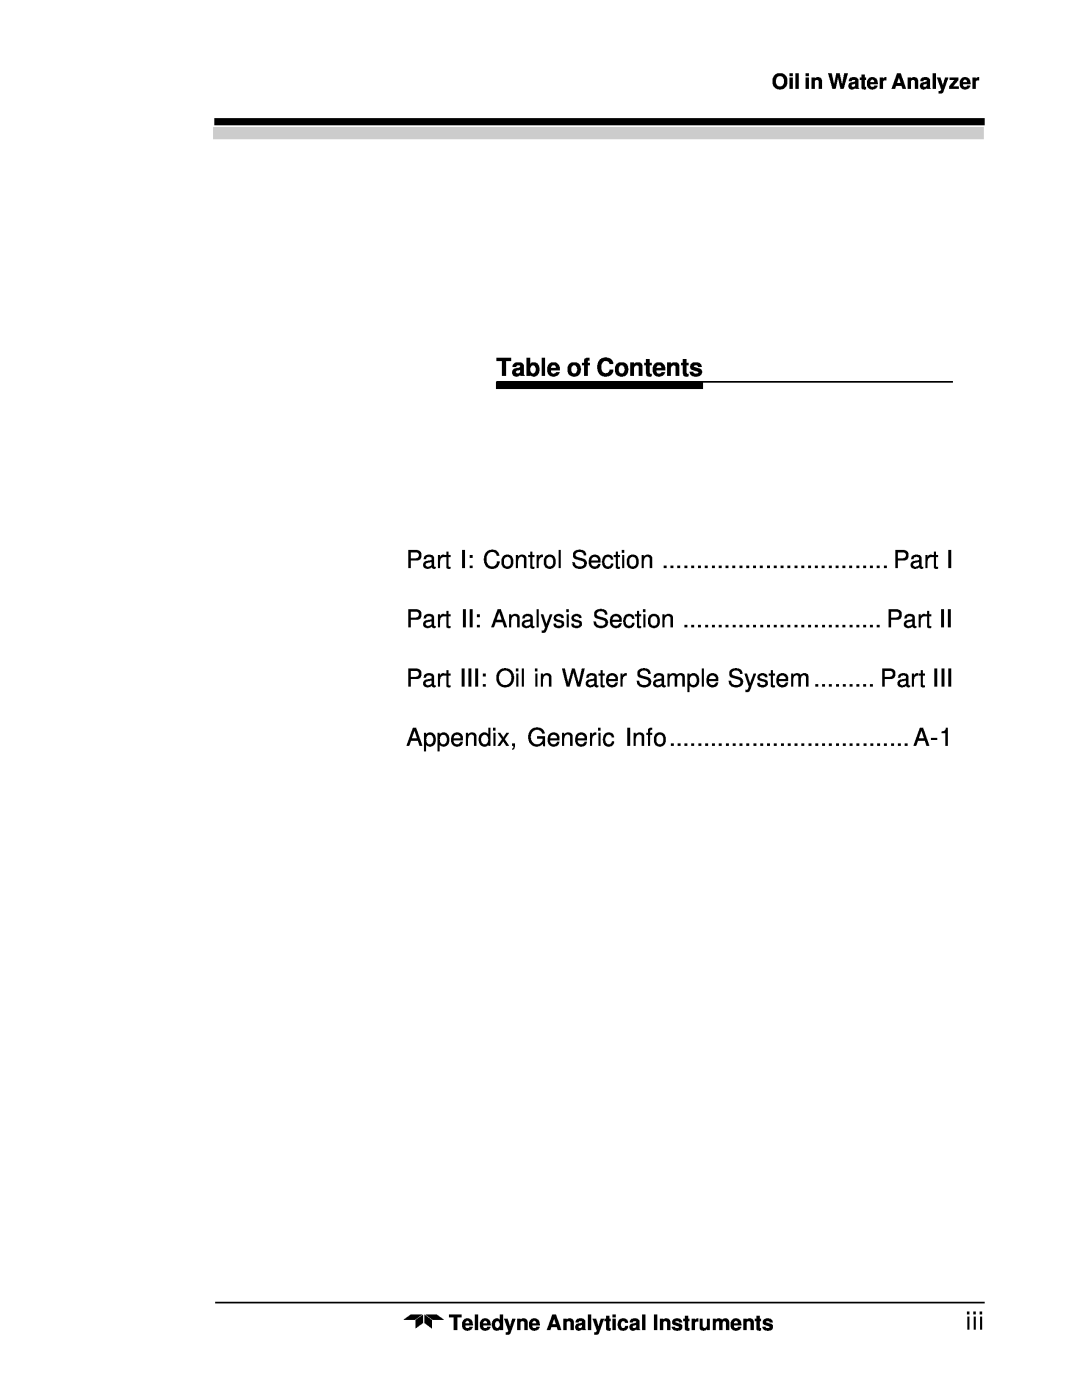 Teledyne 6600 Table of Contents, Part I: Control Section, Part II: Analysis Section, Part III: Oil in Water Sample System 